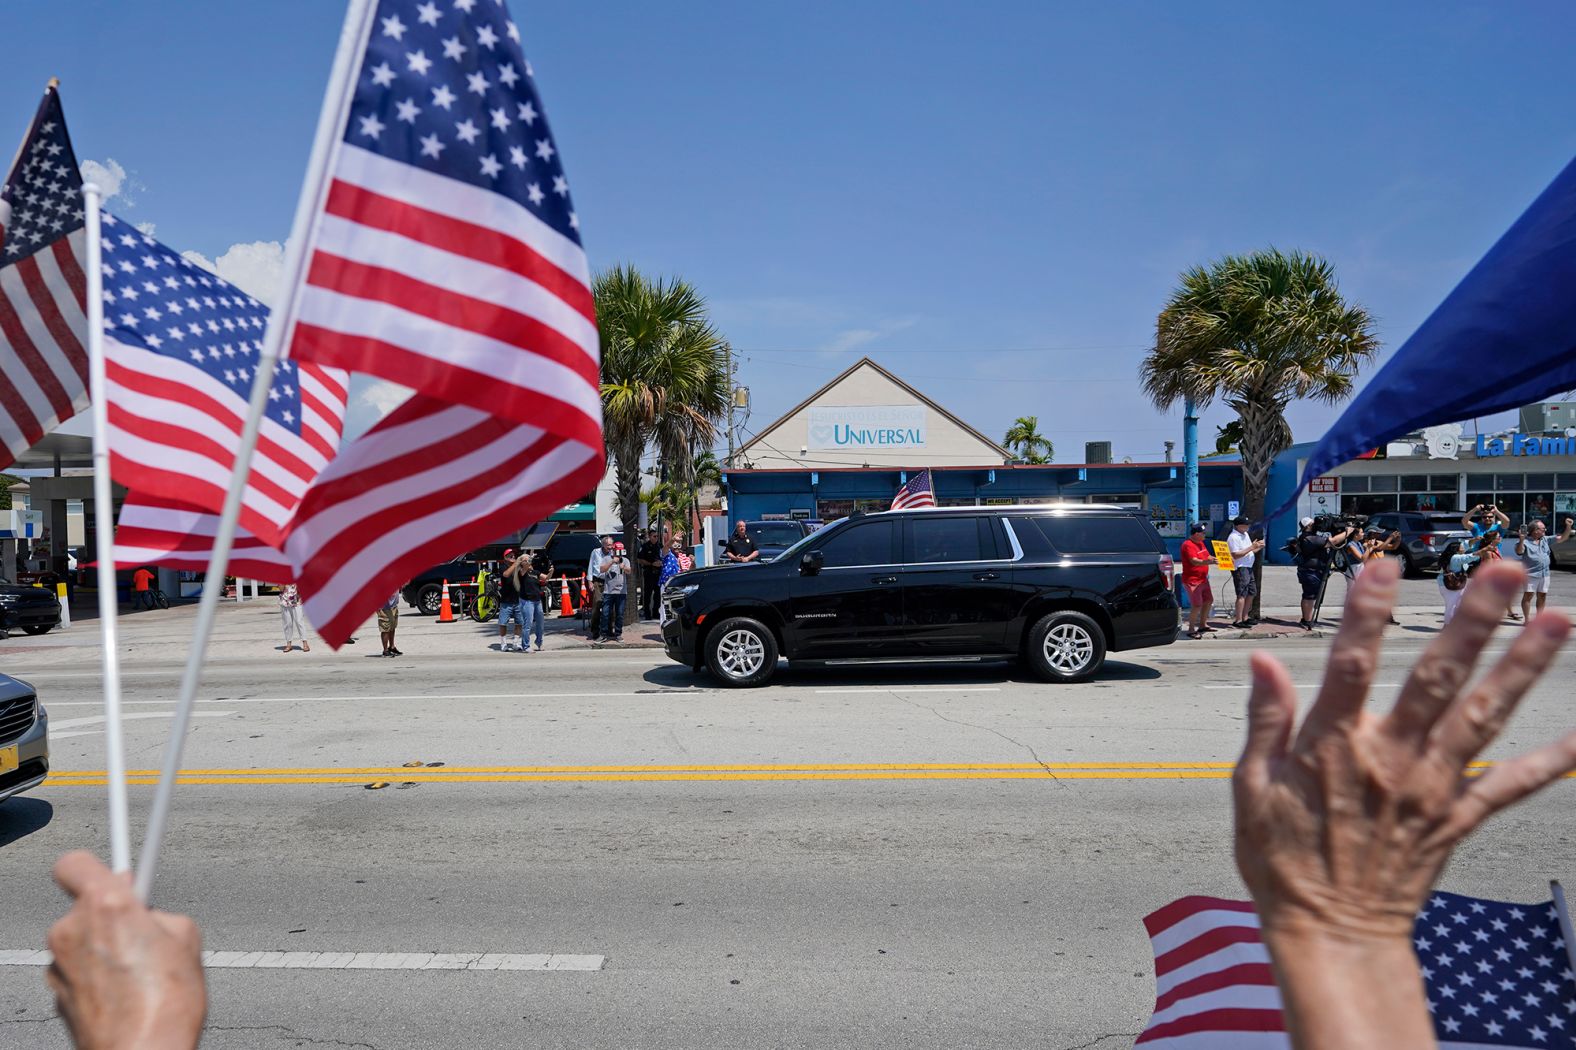 Trump supporters cheer as his motorcade passes by in West Palm Beach, Florida, on April 3.